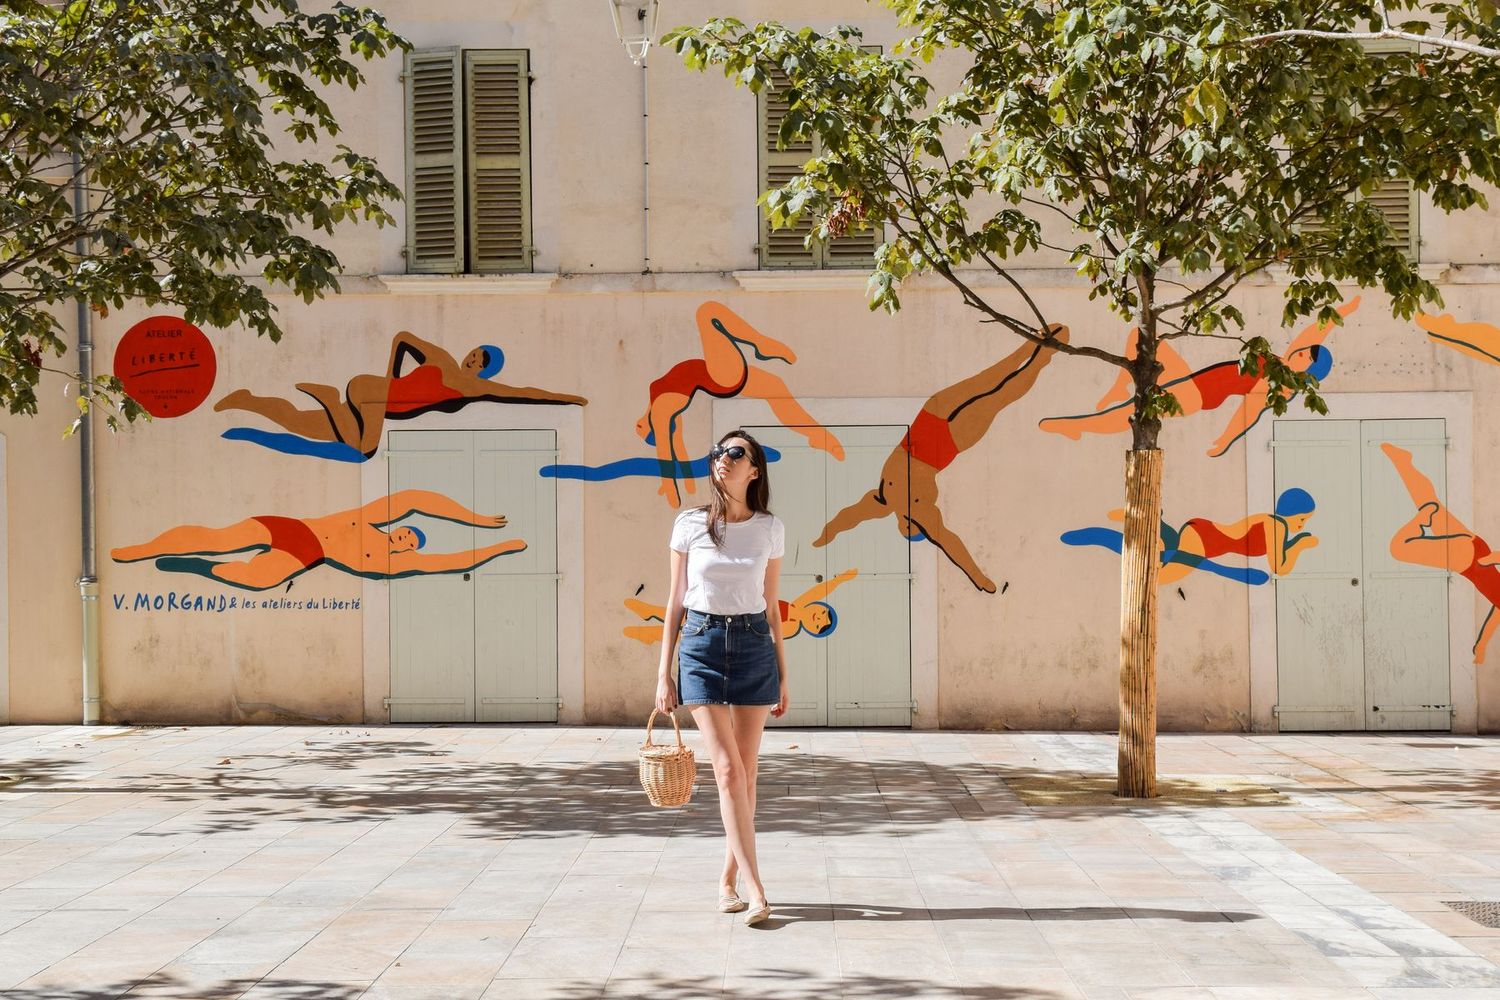 Bathers public wall mural in Old Town Toulon, France